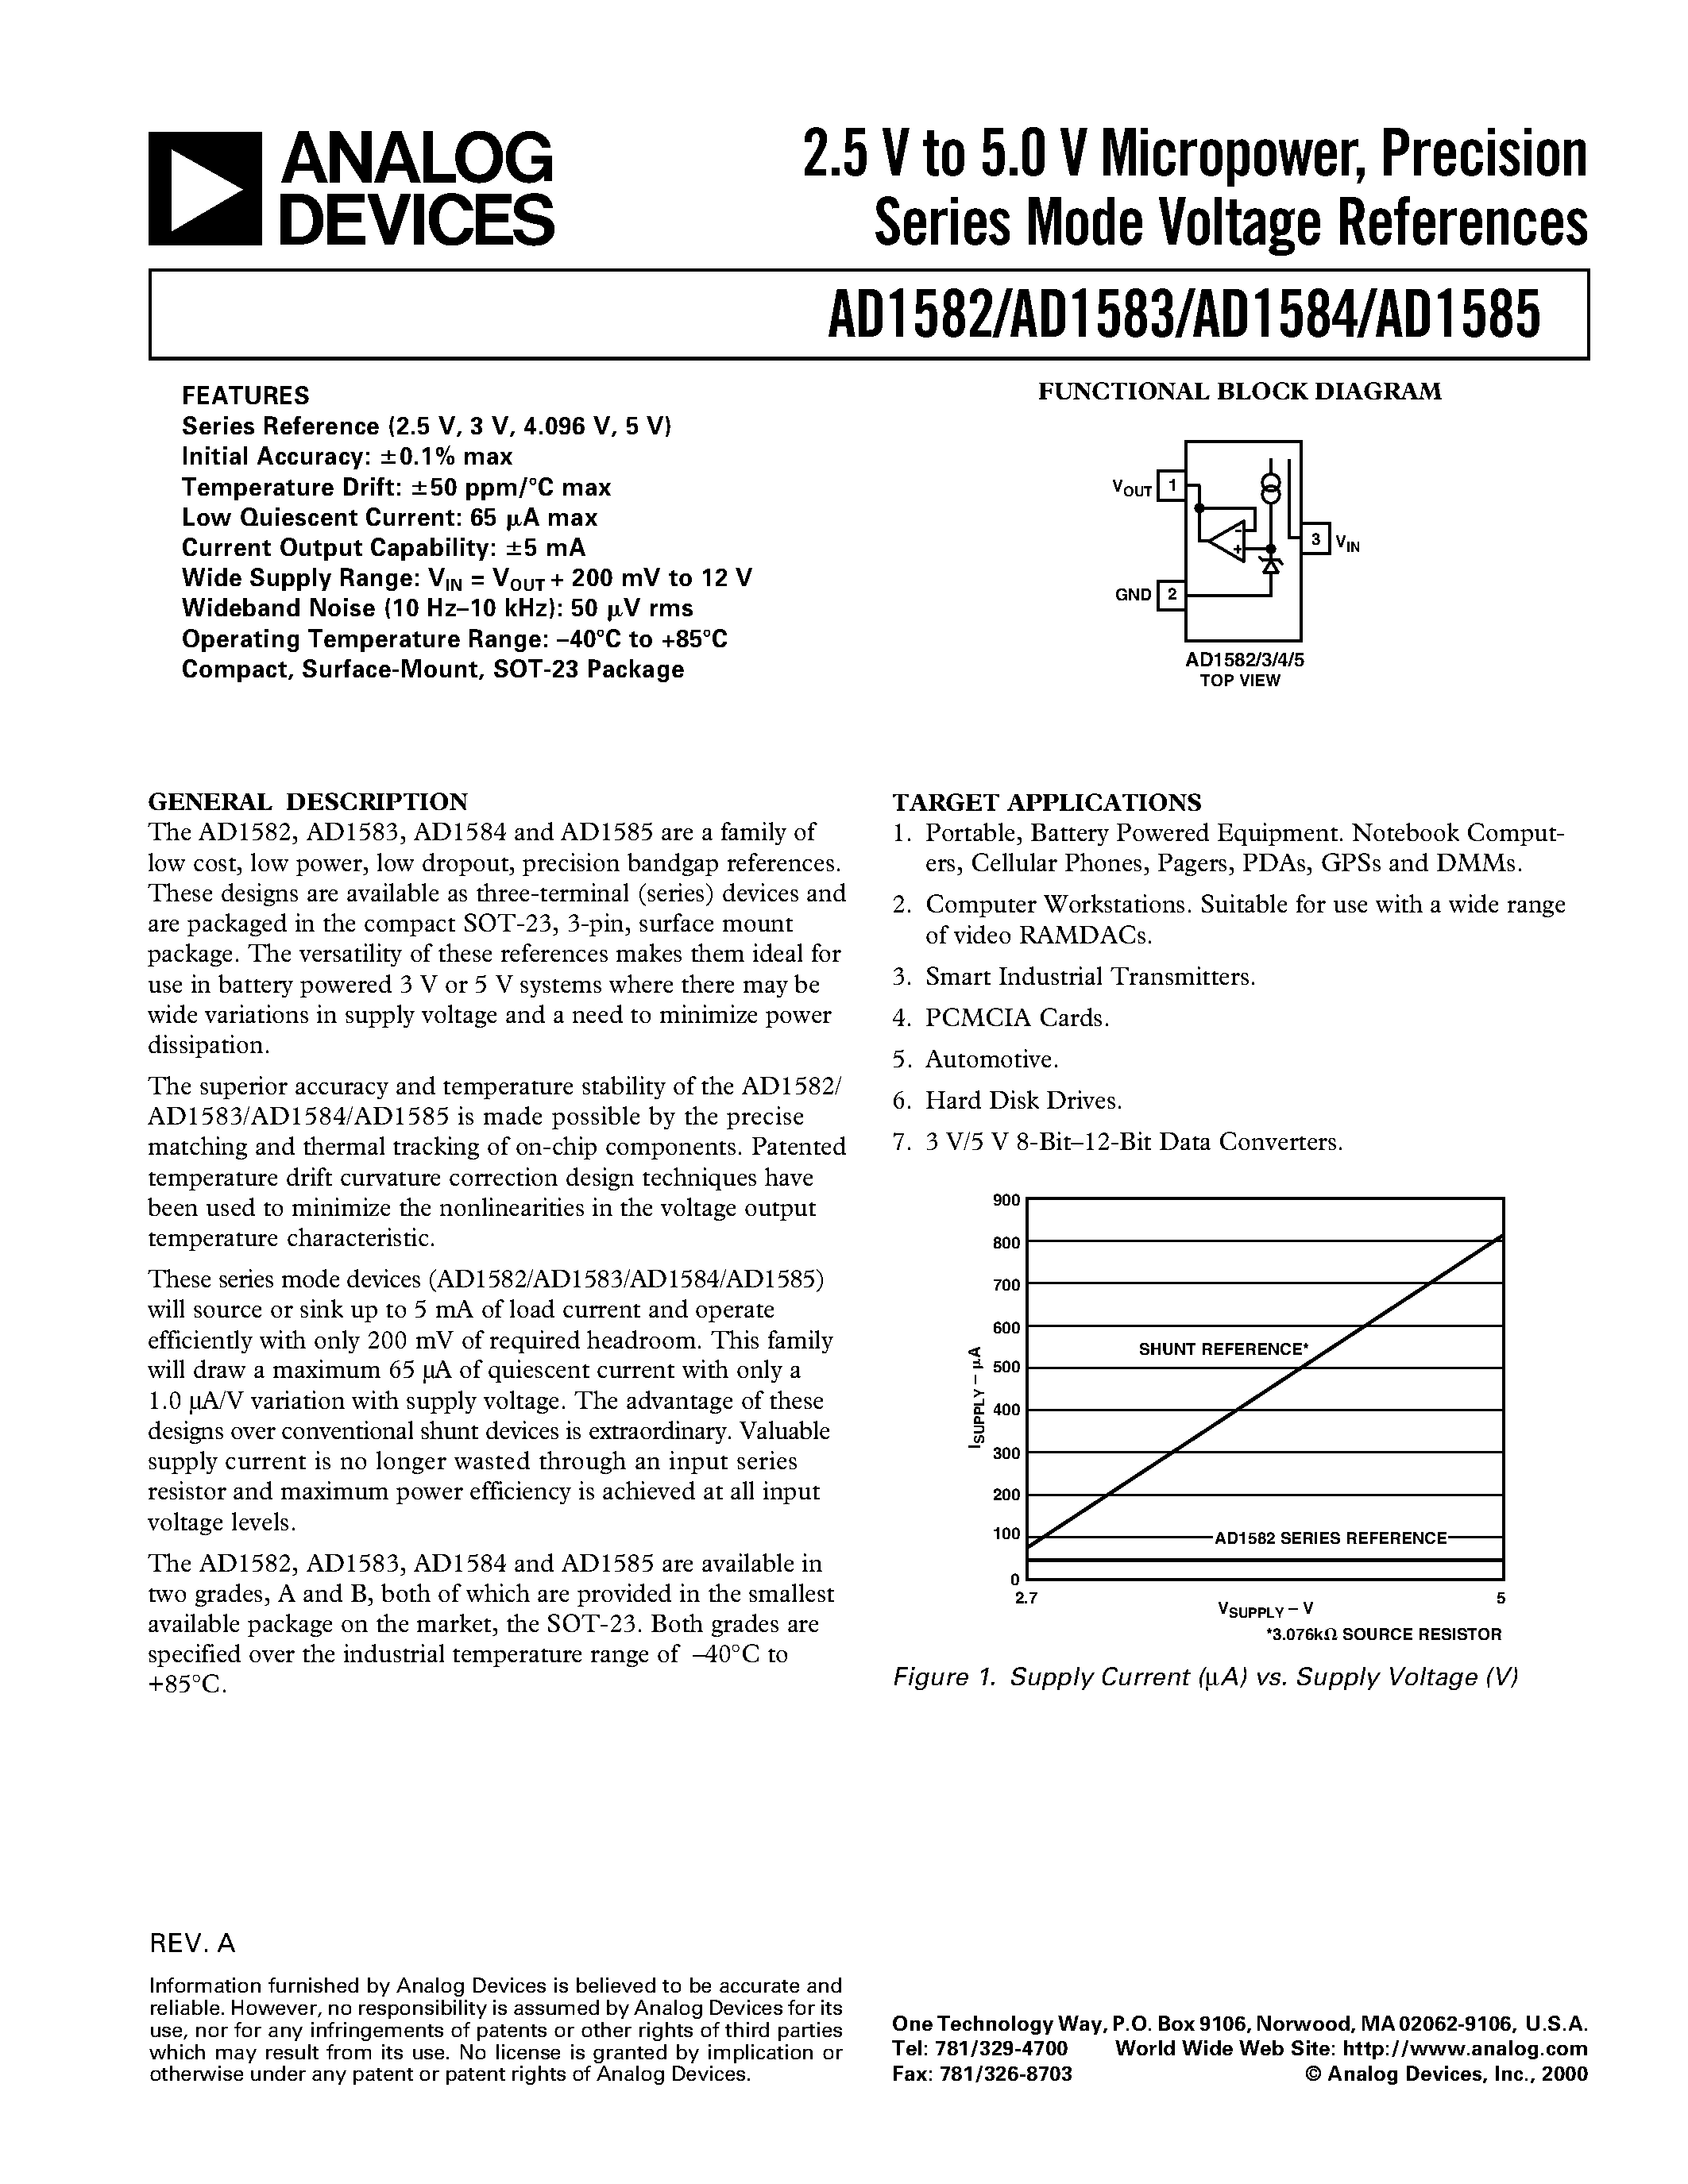 Datasheet AD1585ART - 2.5 V to 5.0 V Micropower/ Precision Series Mode Voltage References page 1